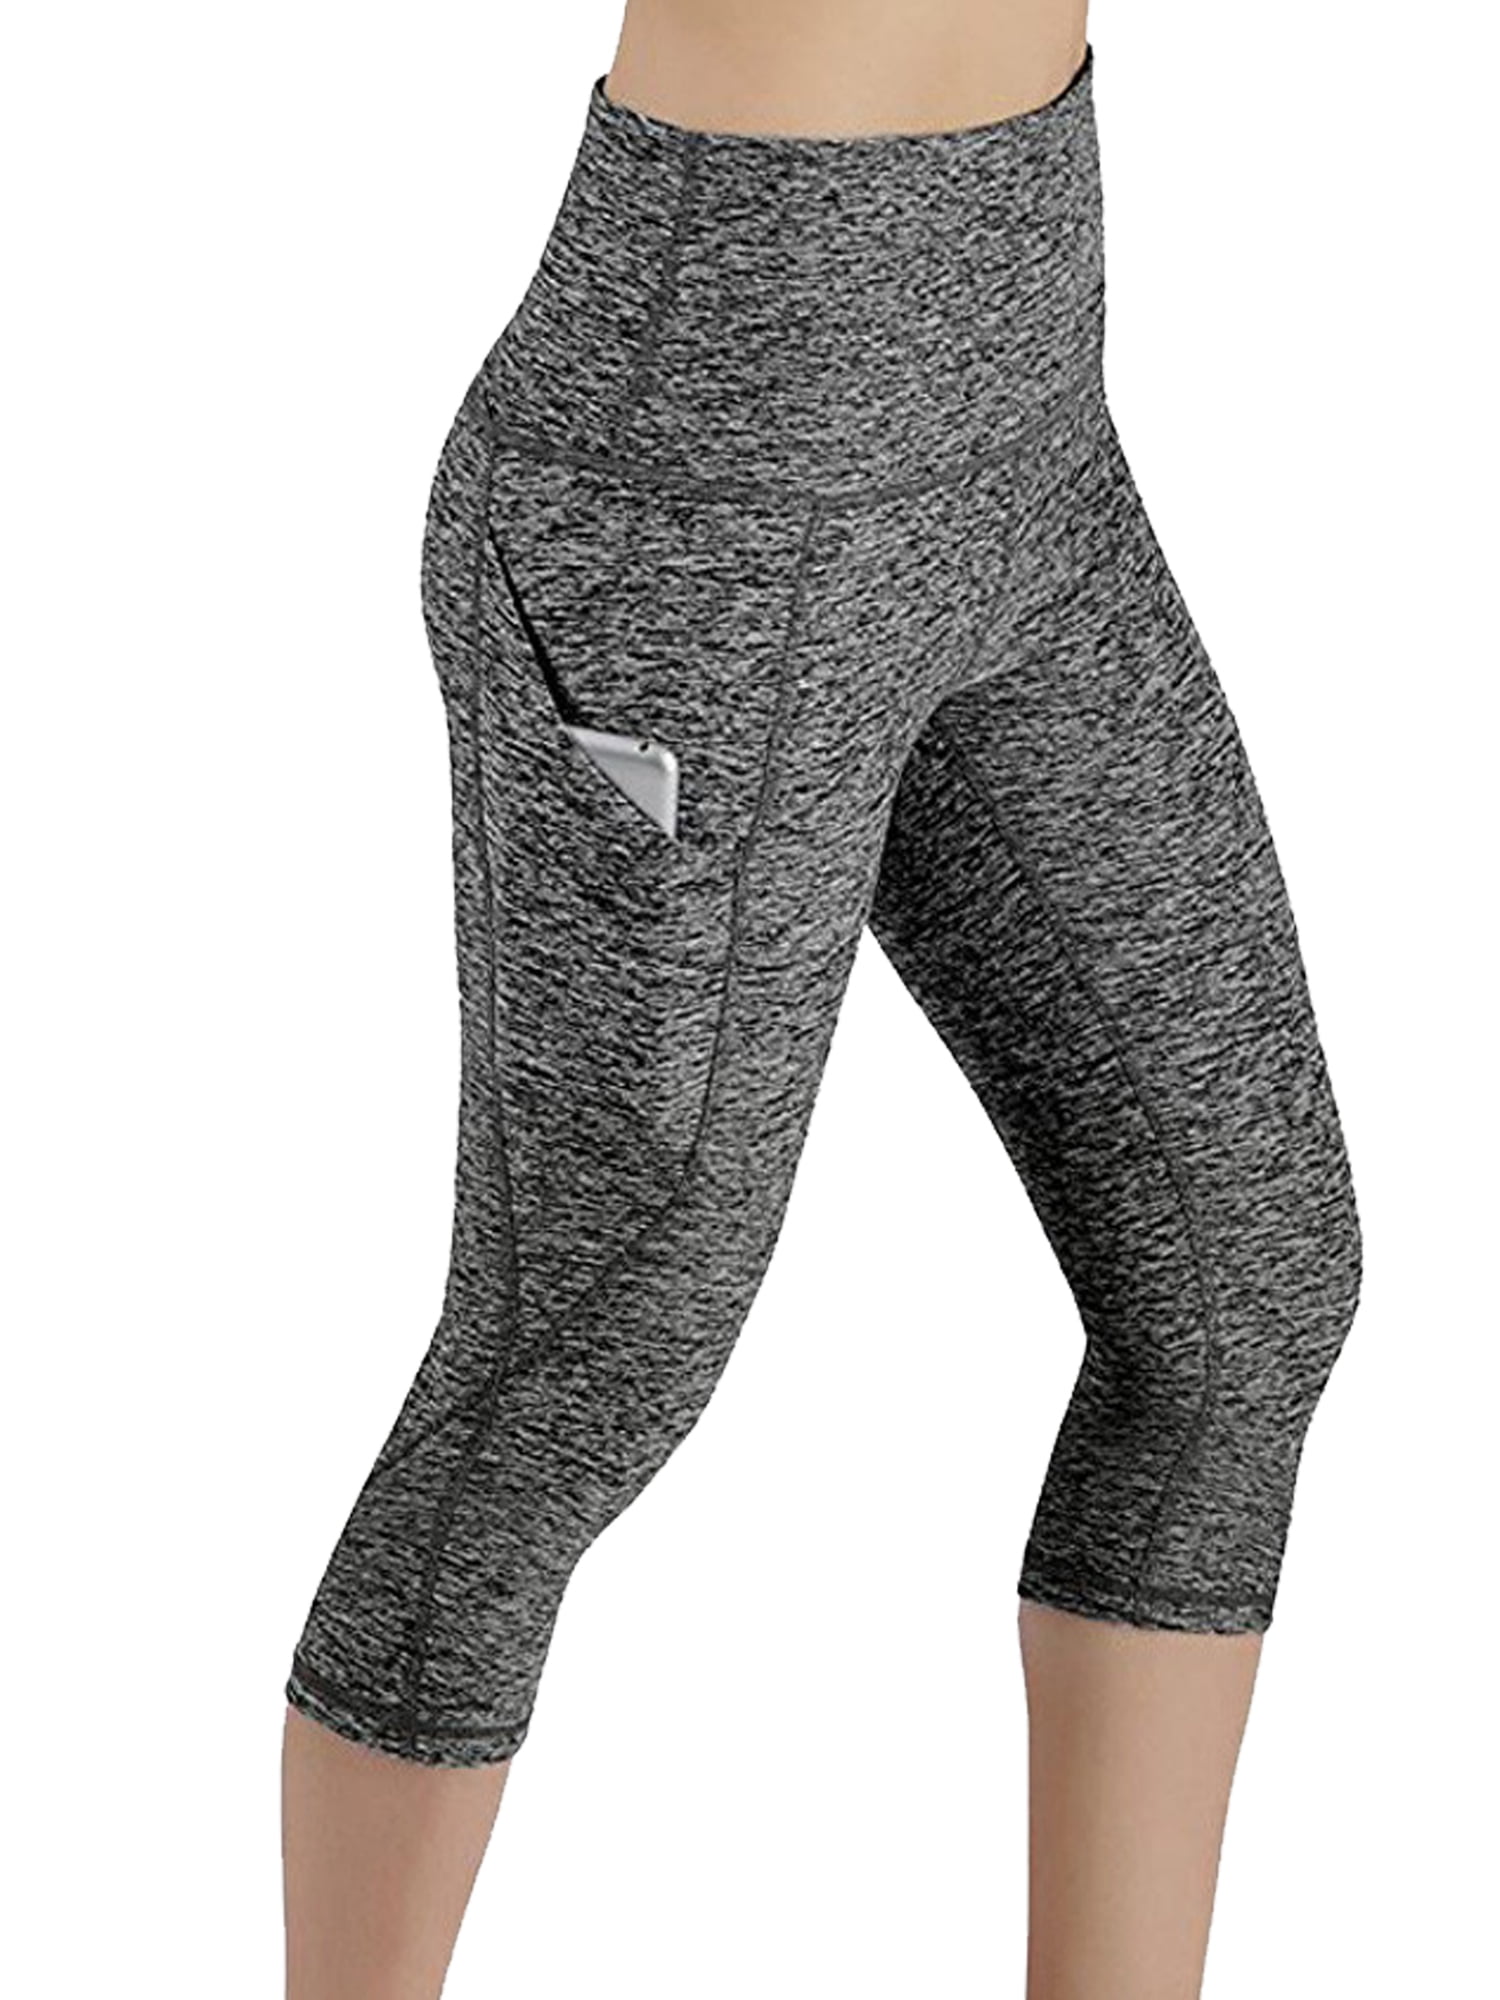 Frontwalk Women High Waist Capris Leggings Activewear Workout Running  Cropped Pants with Pockets